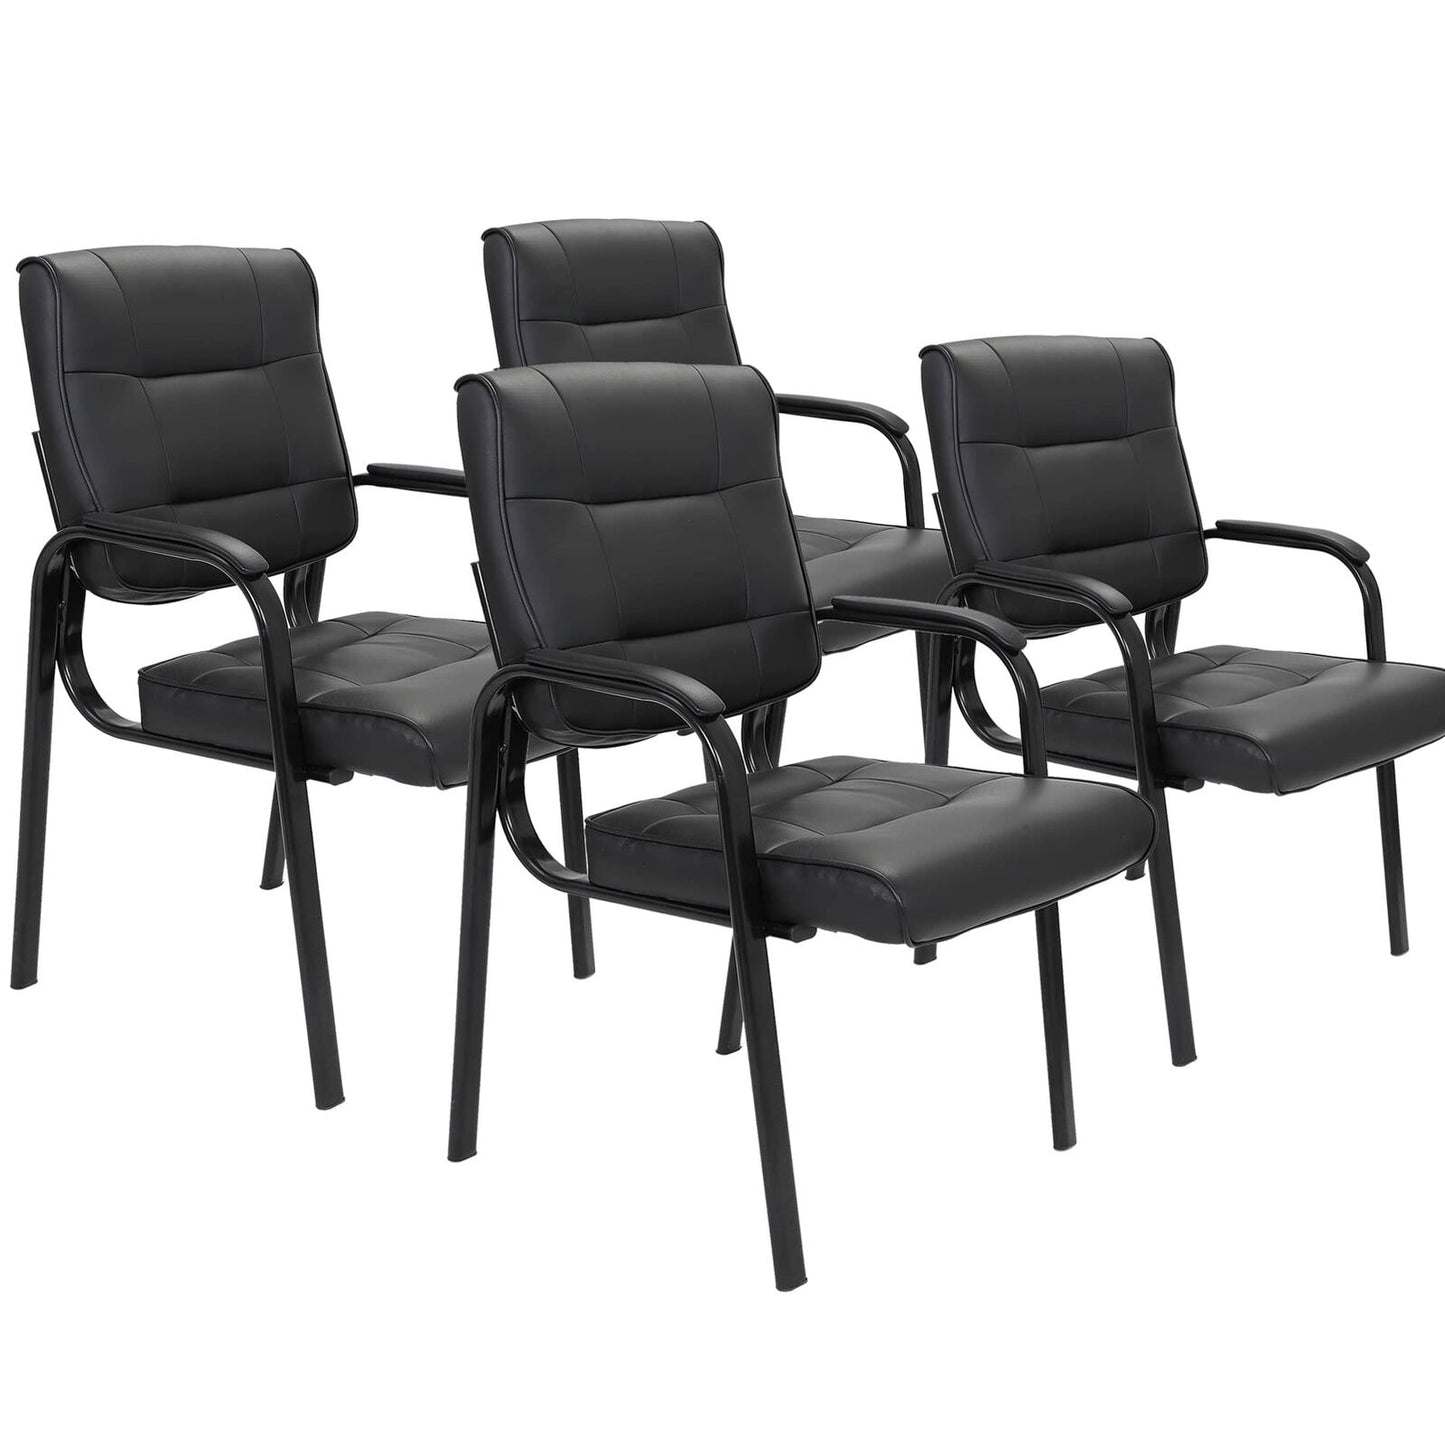 4 Pack Leather Guest Chair Black Waiting Room Office Desk Side Chairs Reception